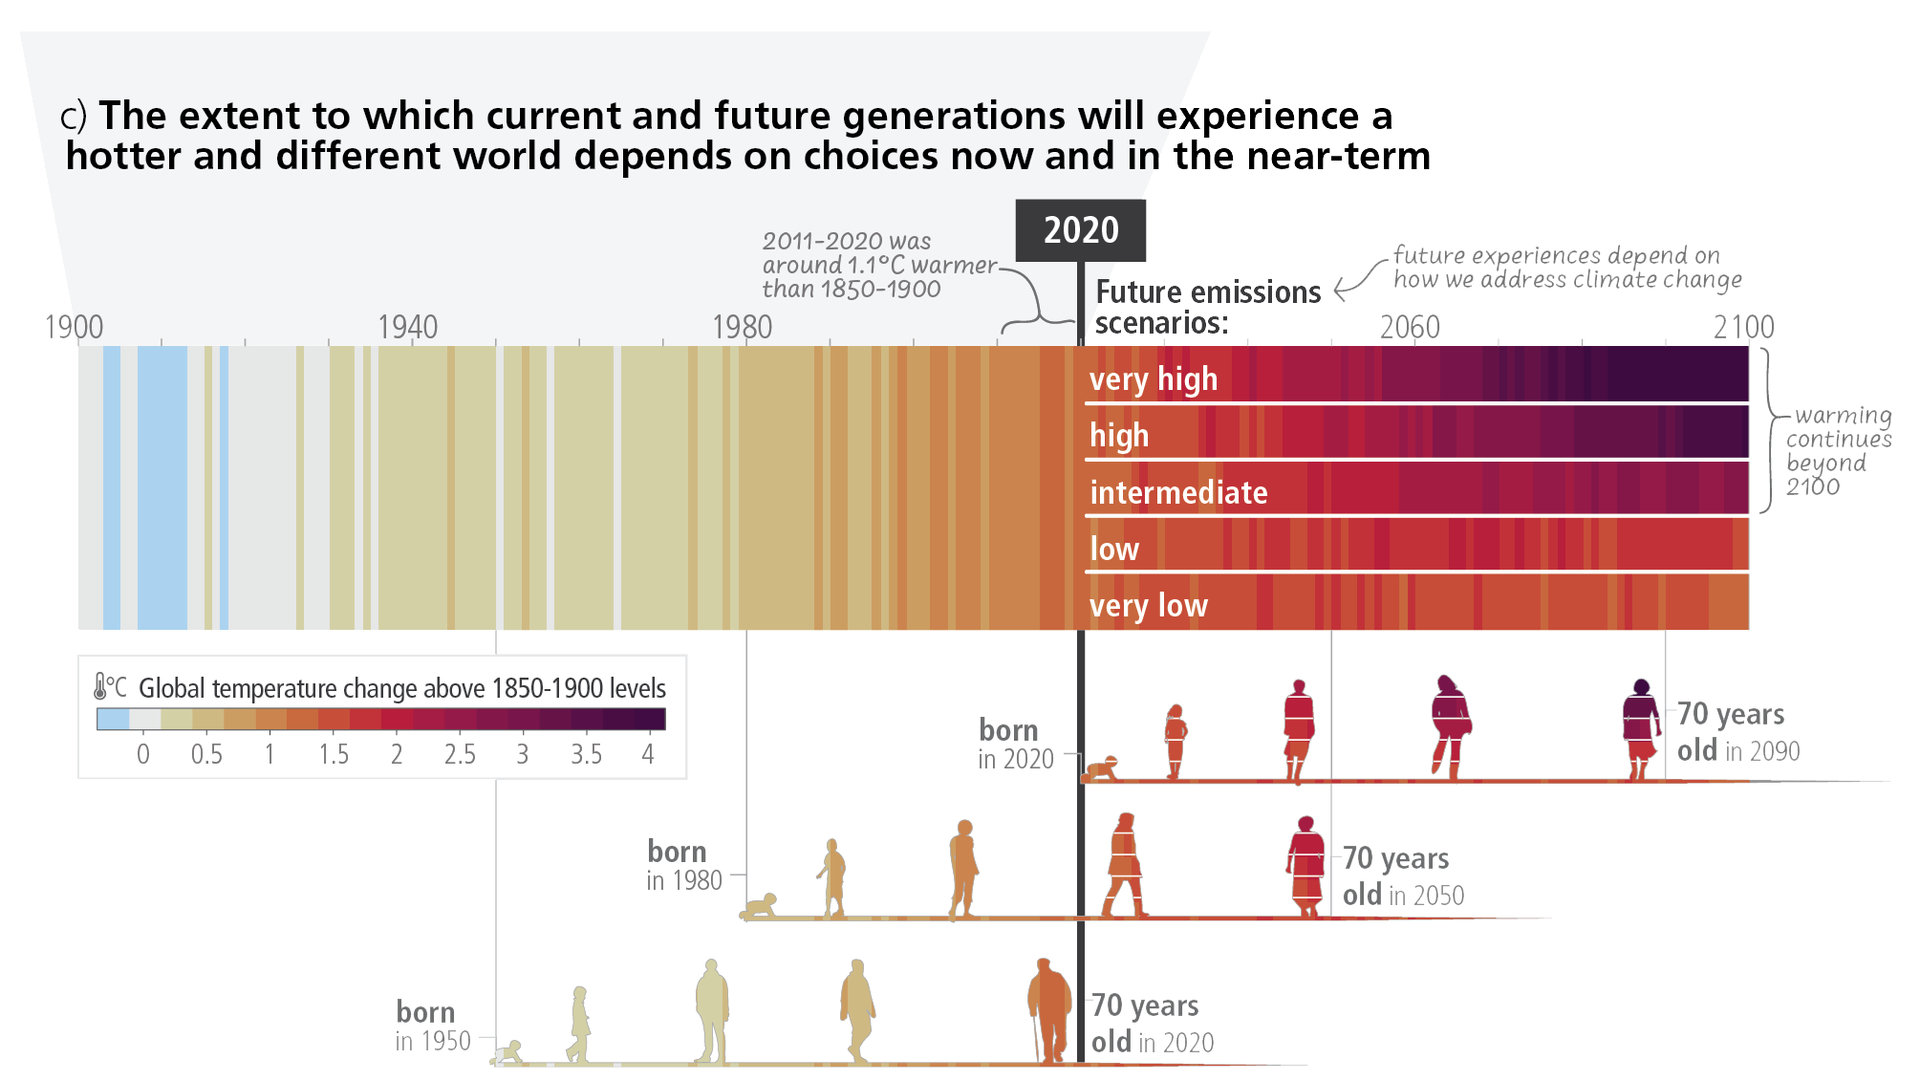 Climate change data visualization showing warming to date, future projected warming depending on our choices, and different human generations' levels of warming.